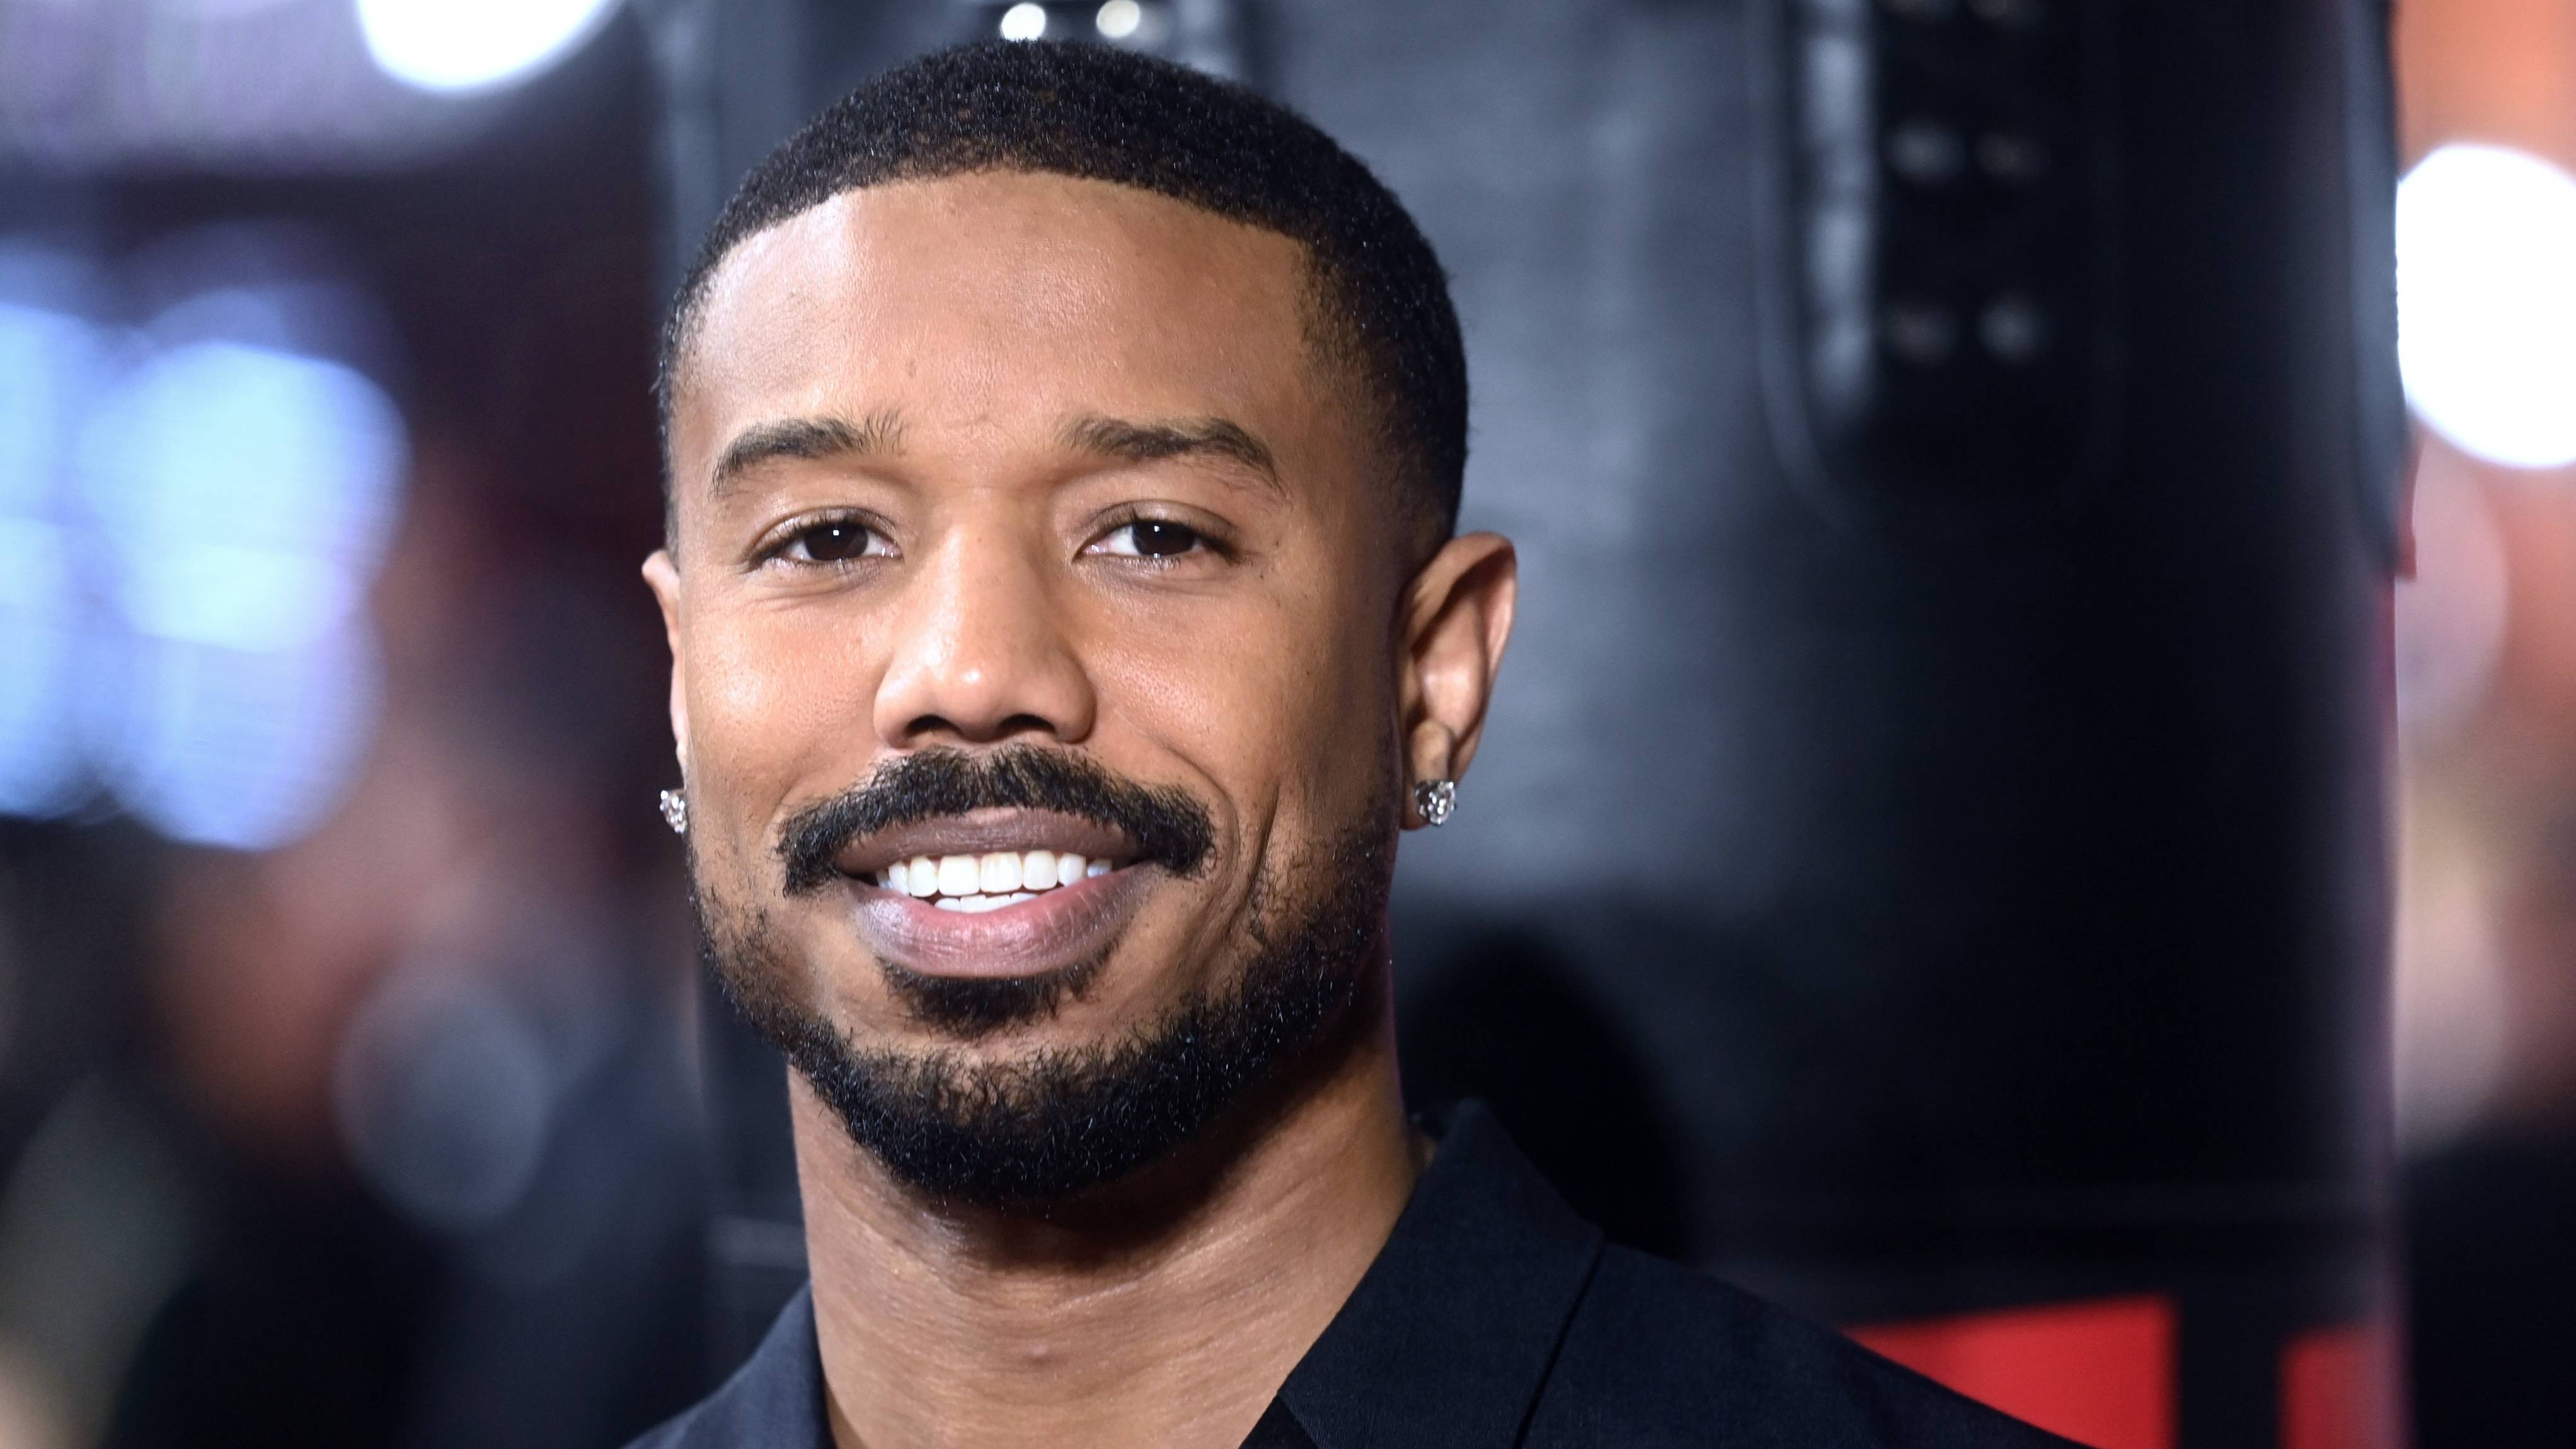 Why did Michael B. Jordan say 'sorry' to his mom over an ad?